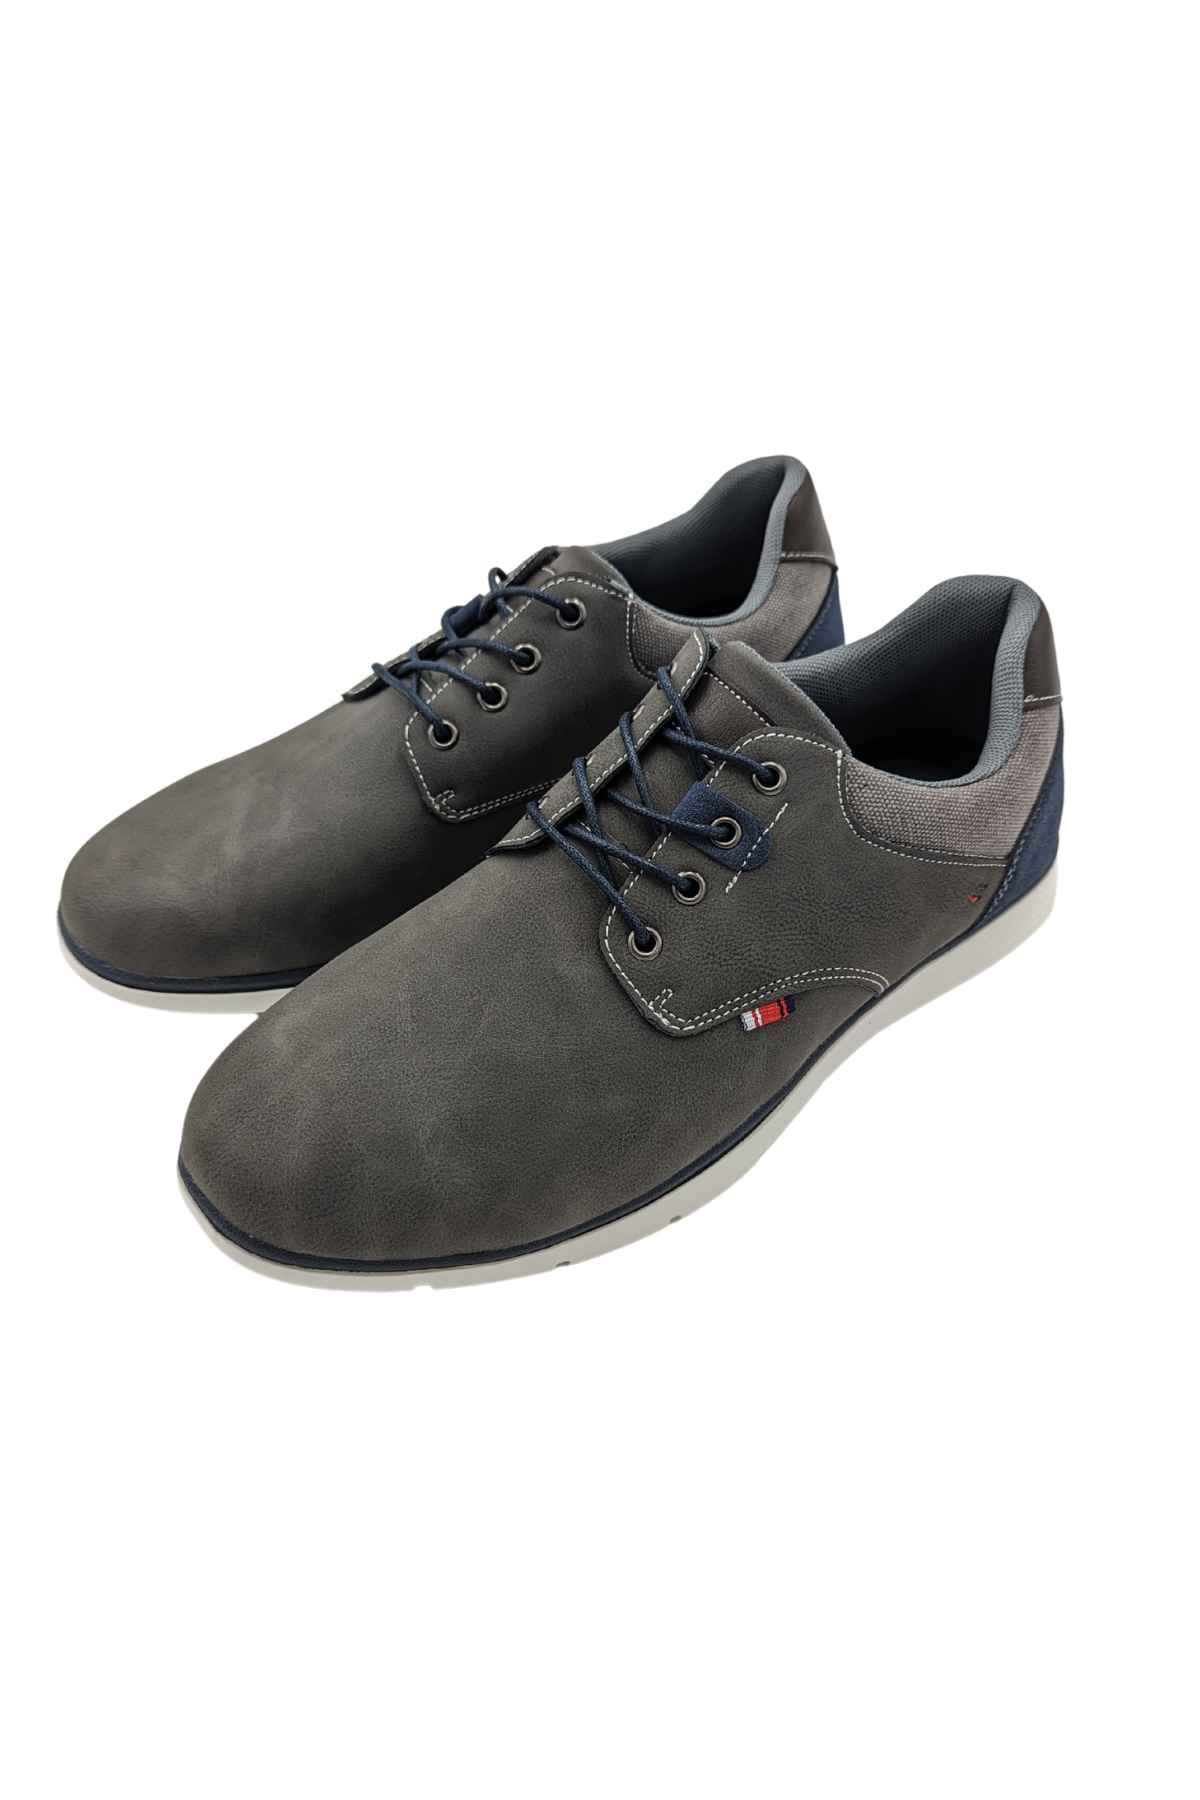 Dolphin Grey Lace Up Shoe-Side view